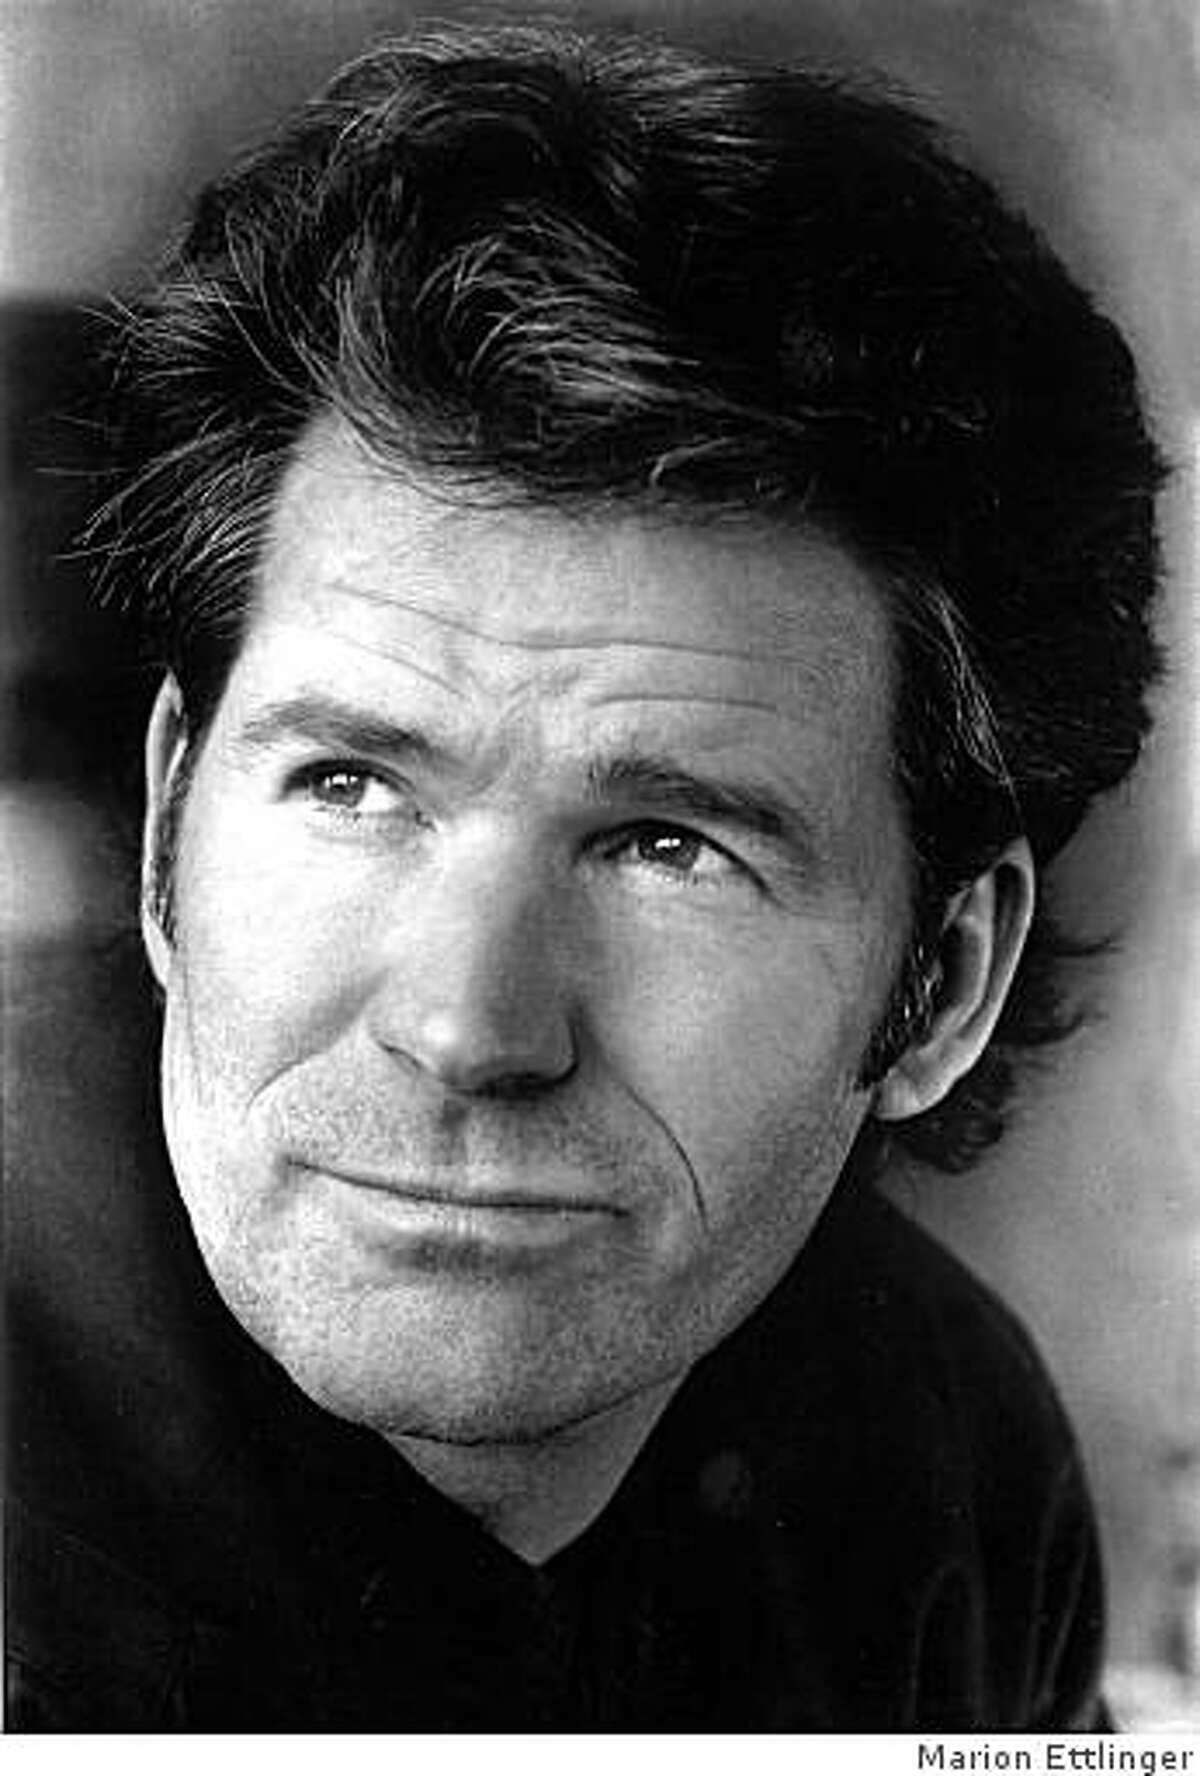 Andre Dubus III, author of "The Garden of Last Days" / Credit: Marion Ettlinger / FOR USE WITH BOOK REVIEW ONLY